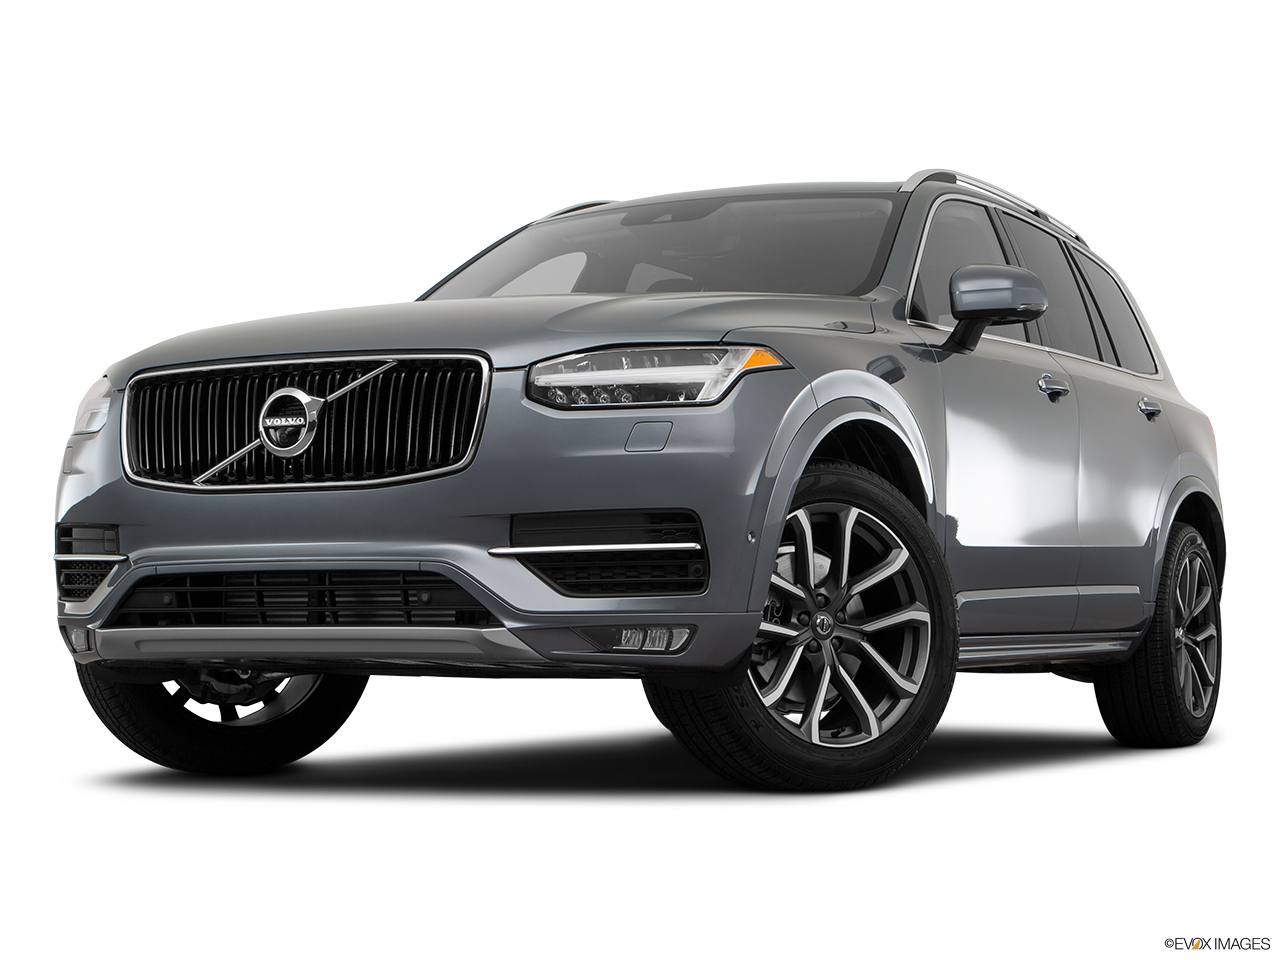 2018 Volvo XC90 T6 Momentum Front angle view, low wide perspective. 